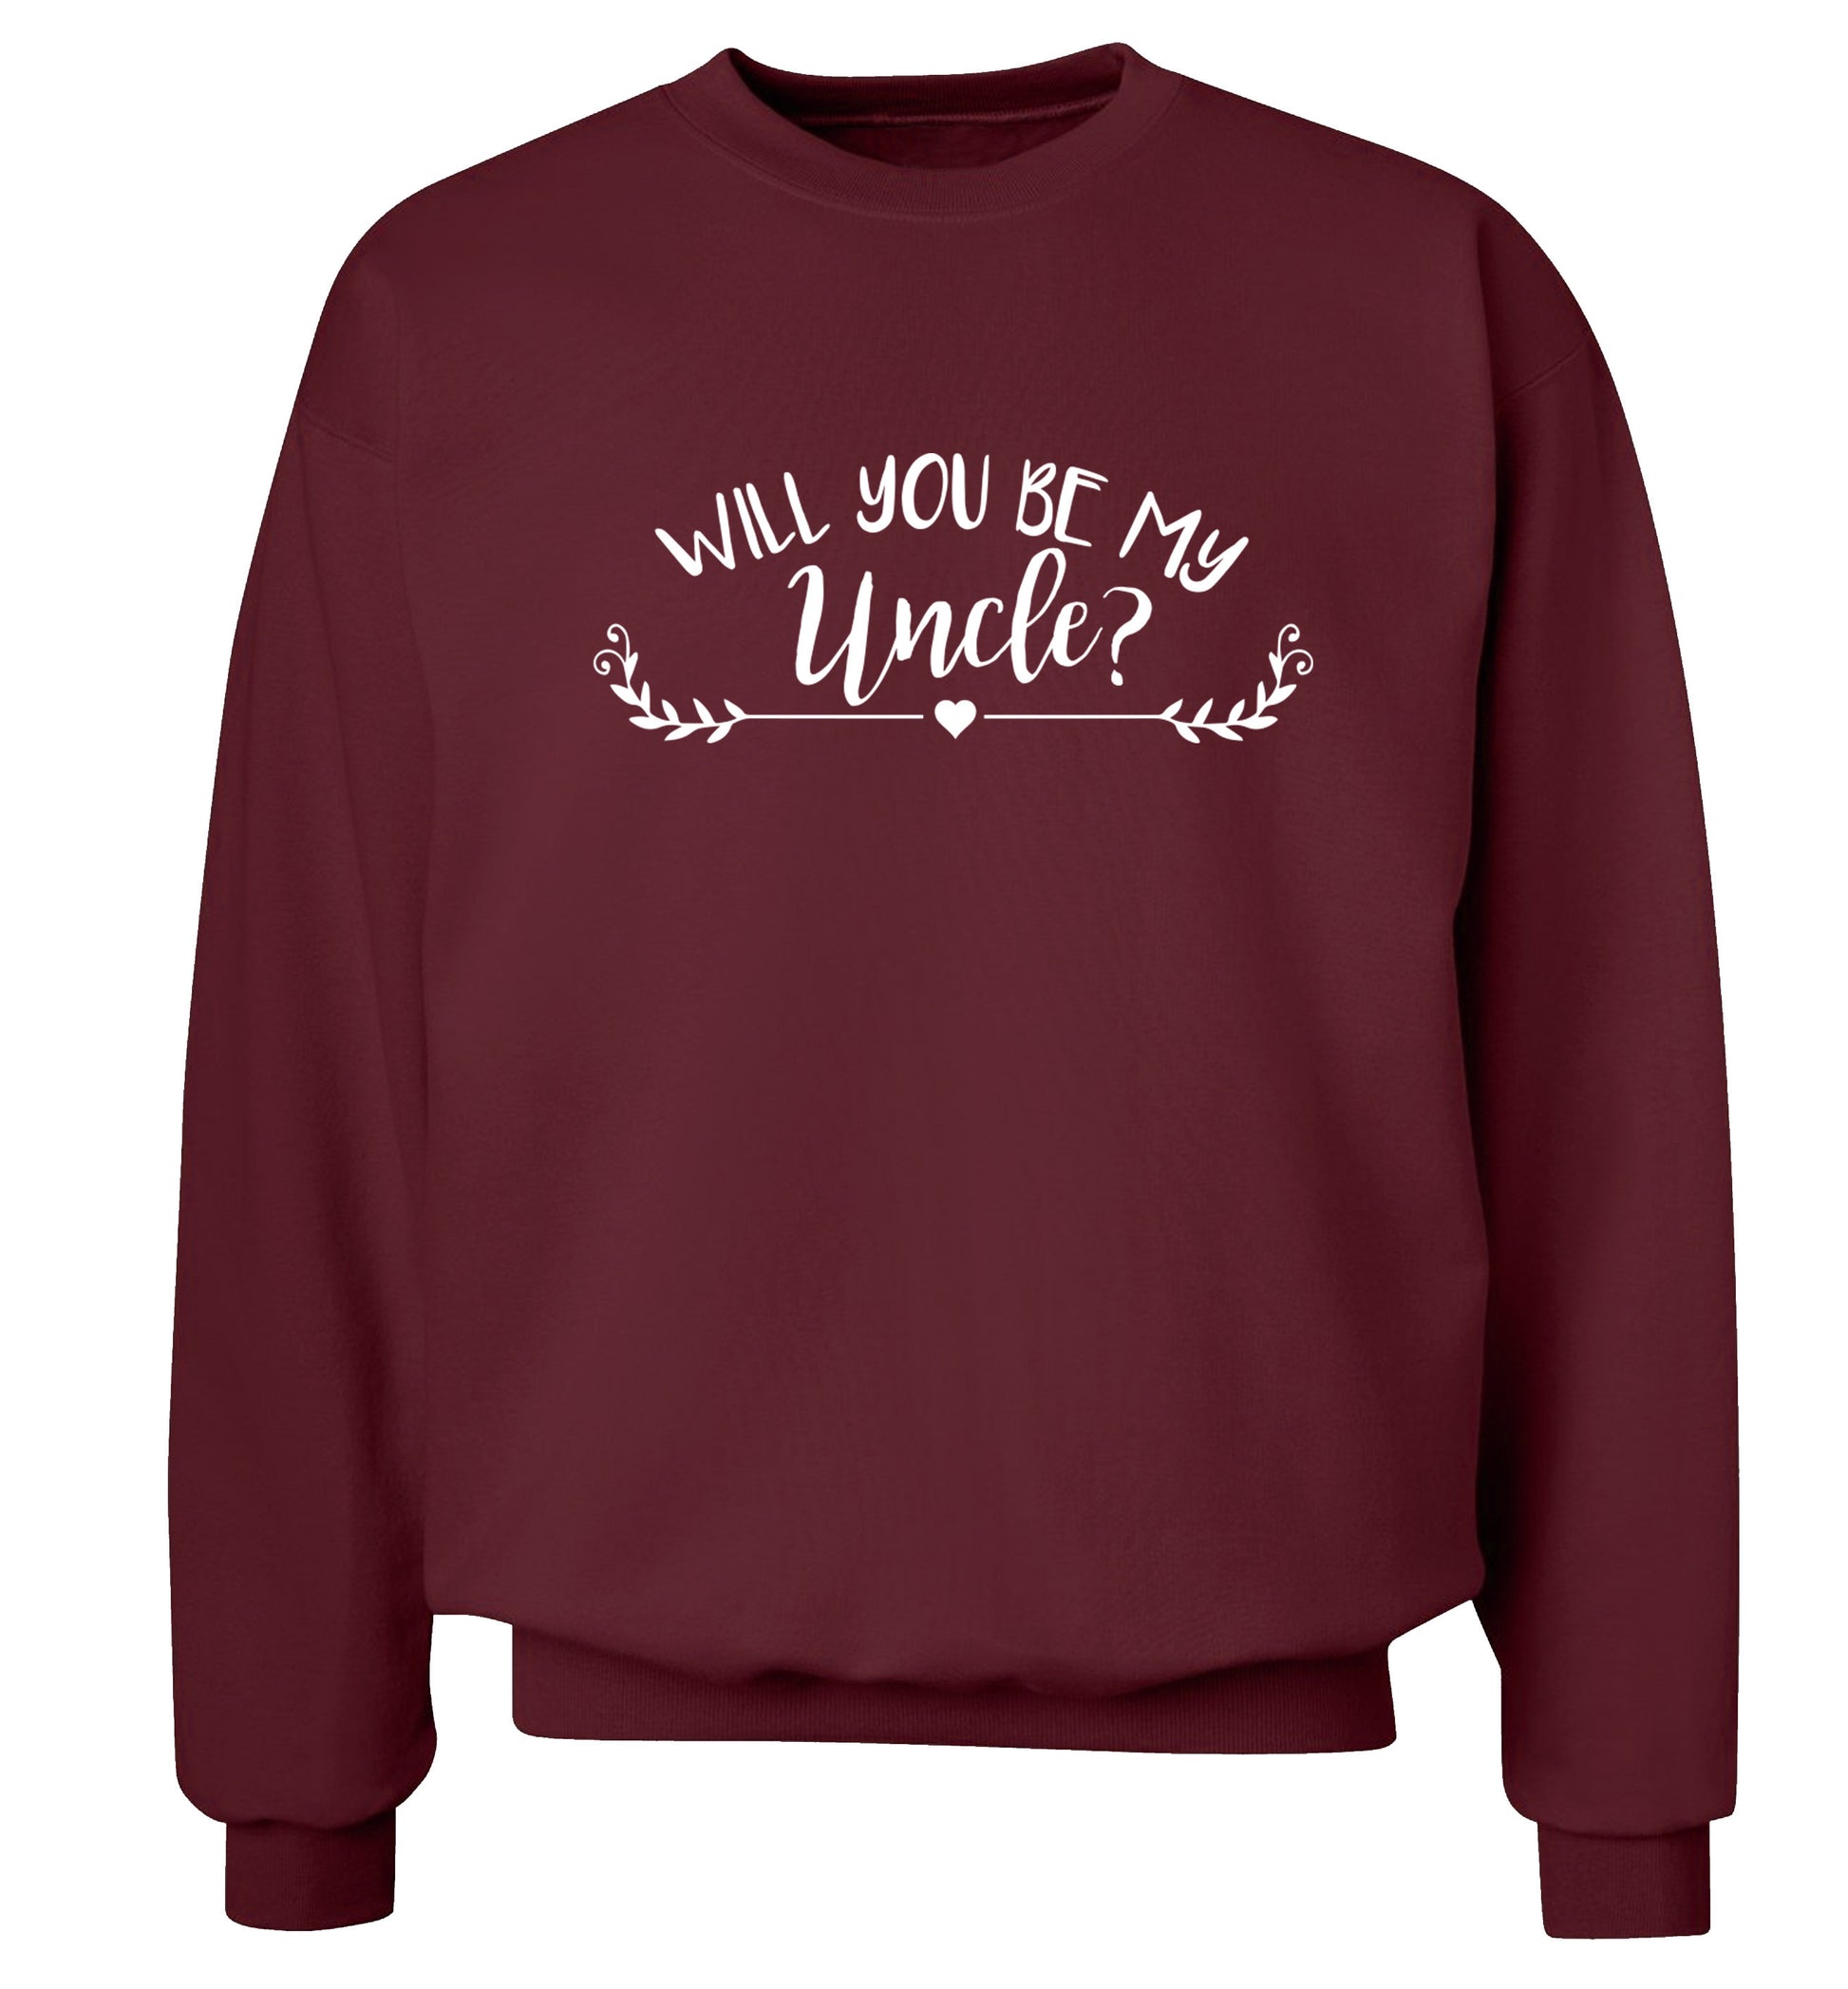 Will you be my uncle? Adult's unisex maroon Sweater 2XL